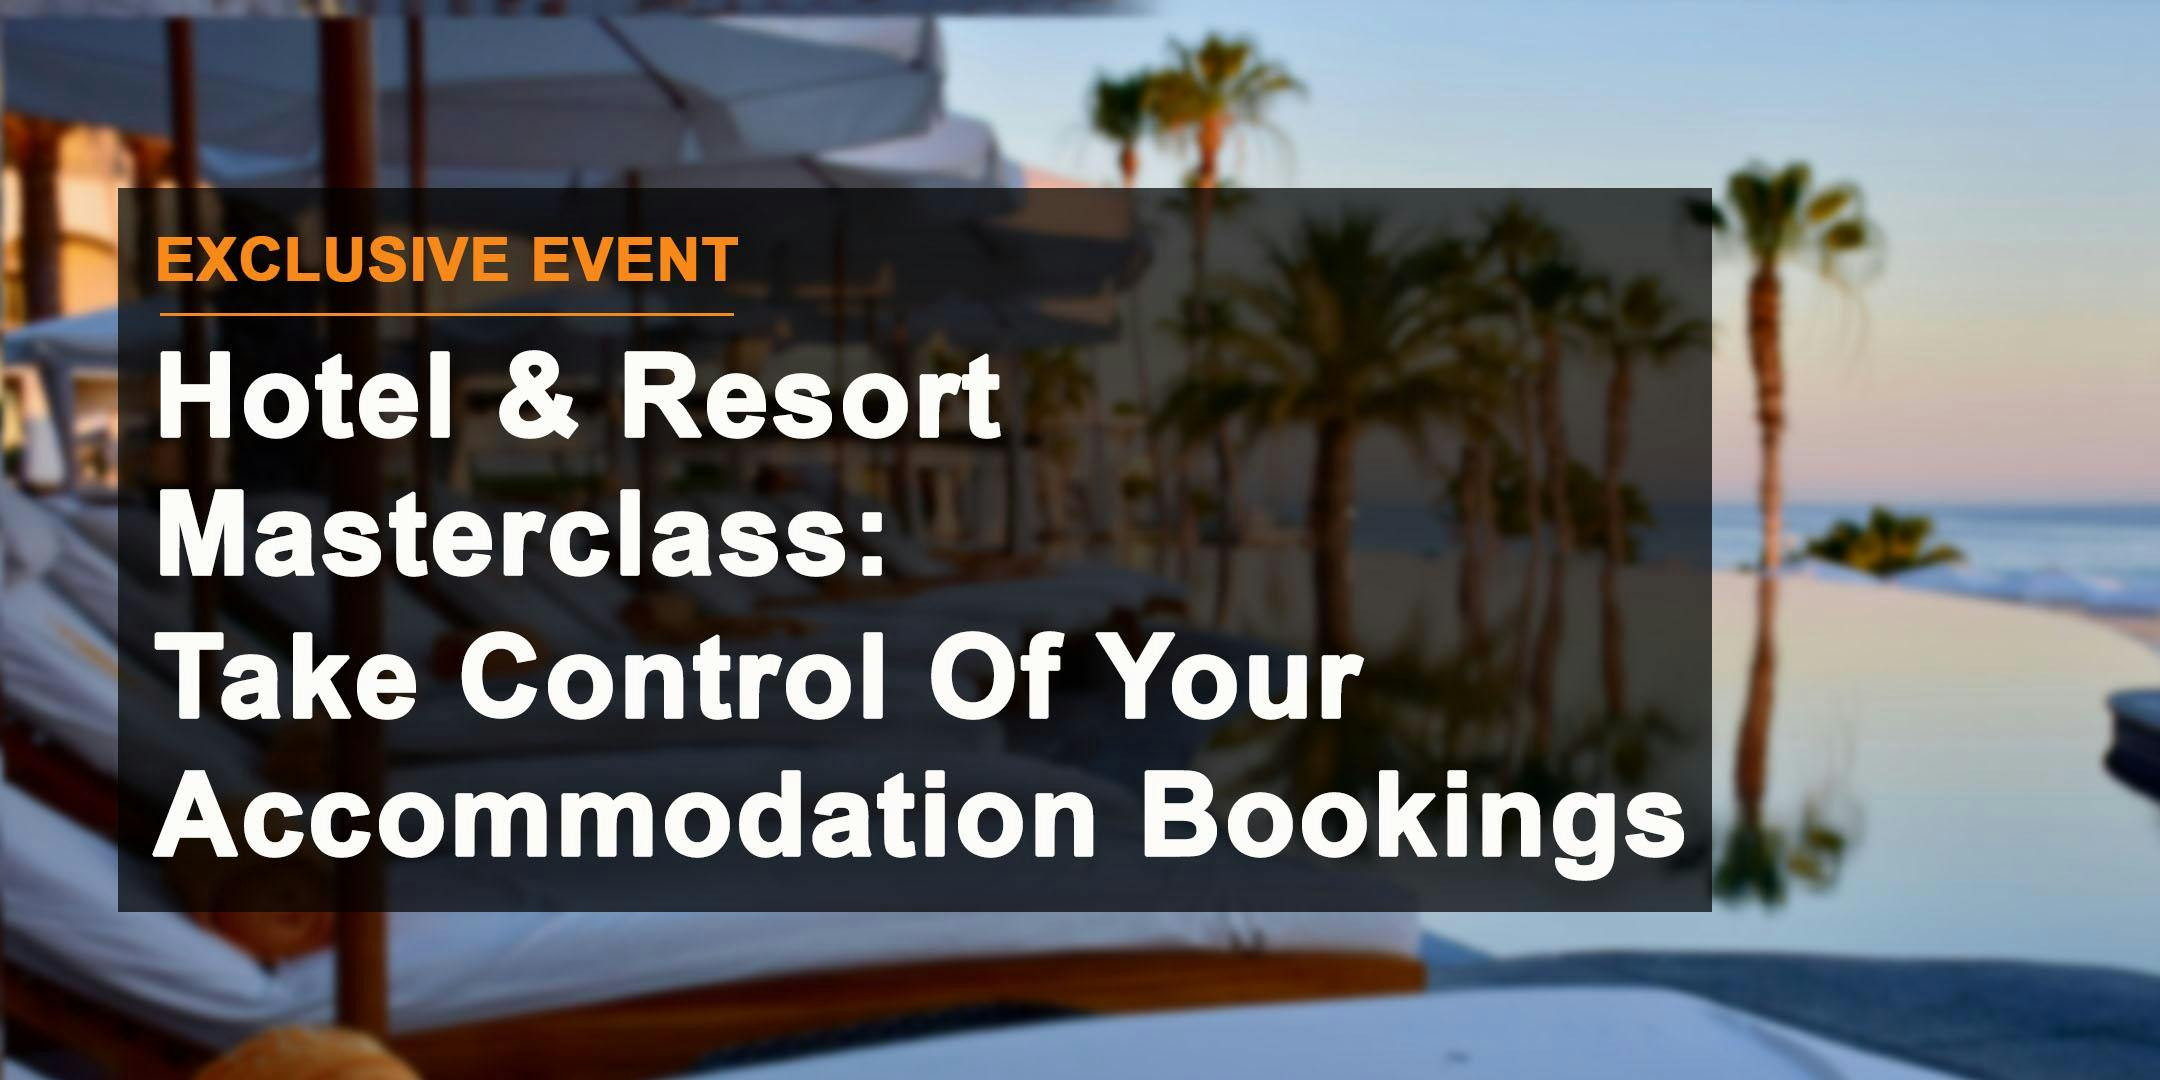 Hotel & Resort Masterclass: Take Control Of Your Accommodation Bookings